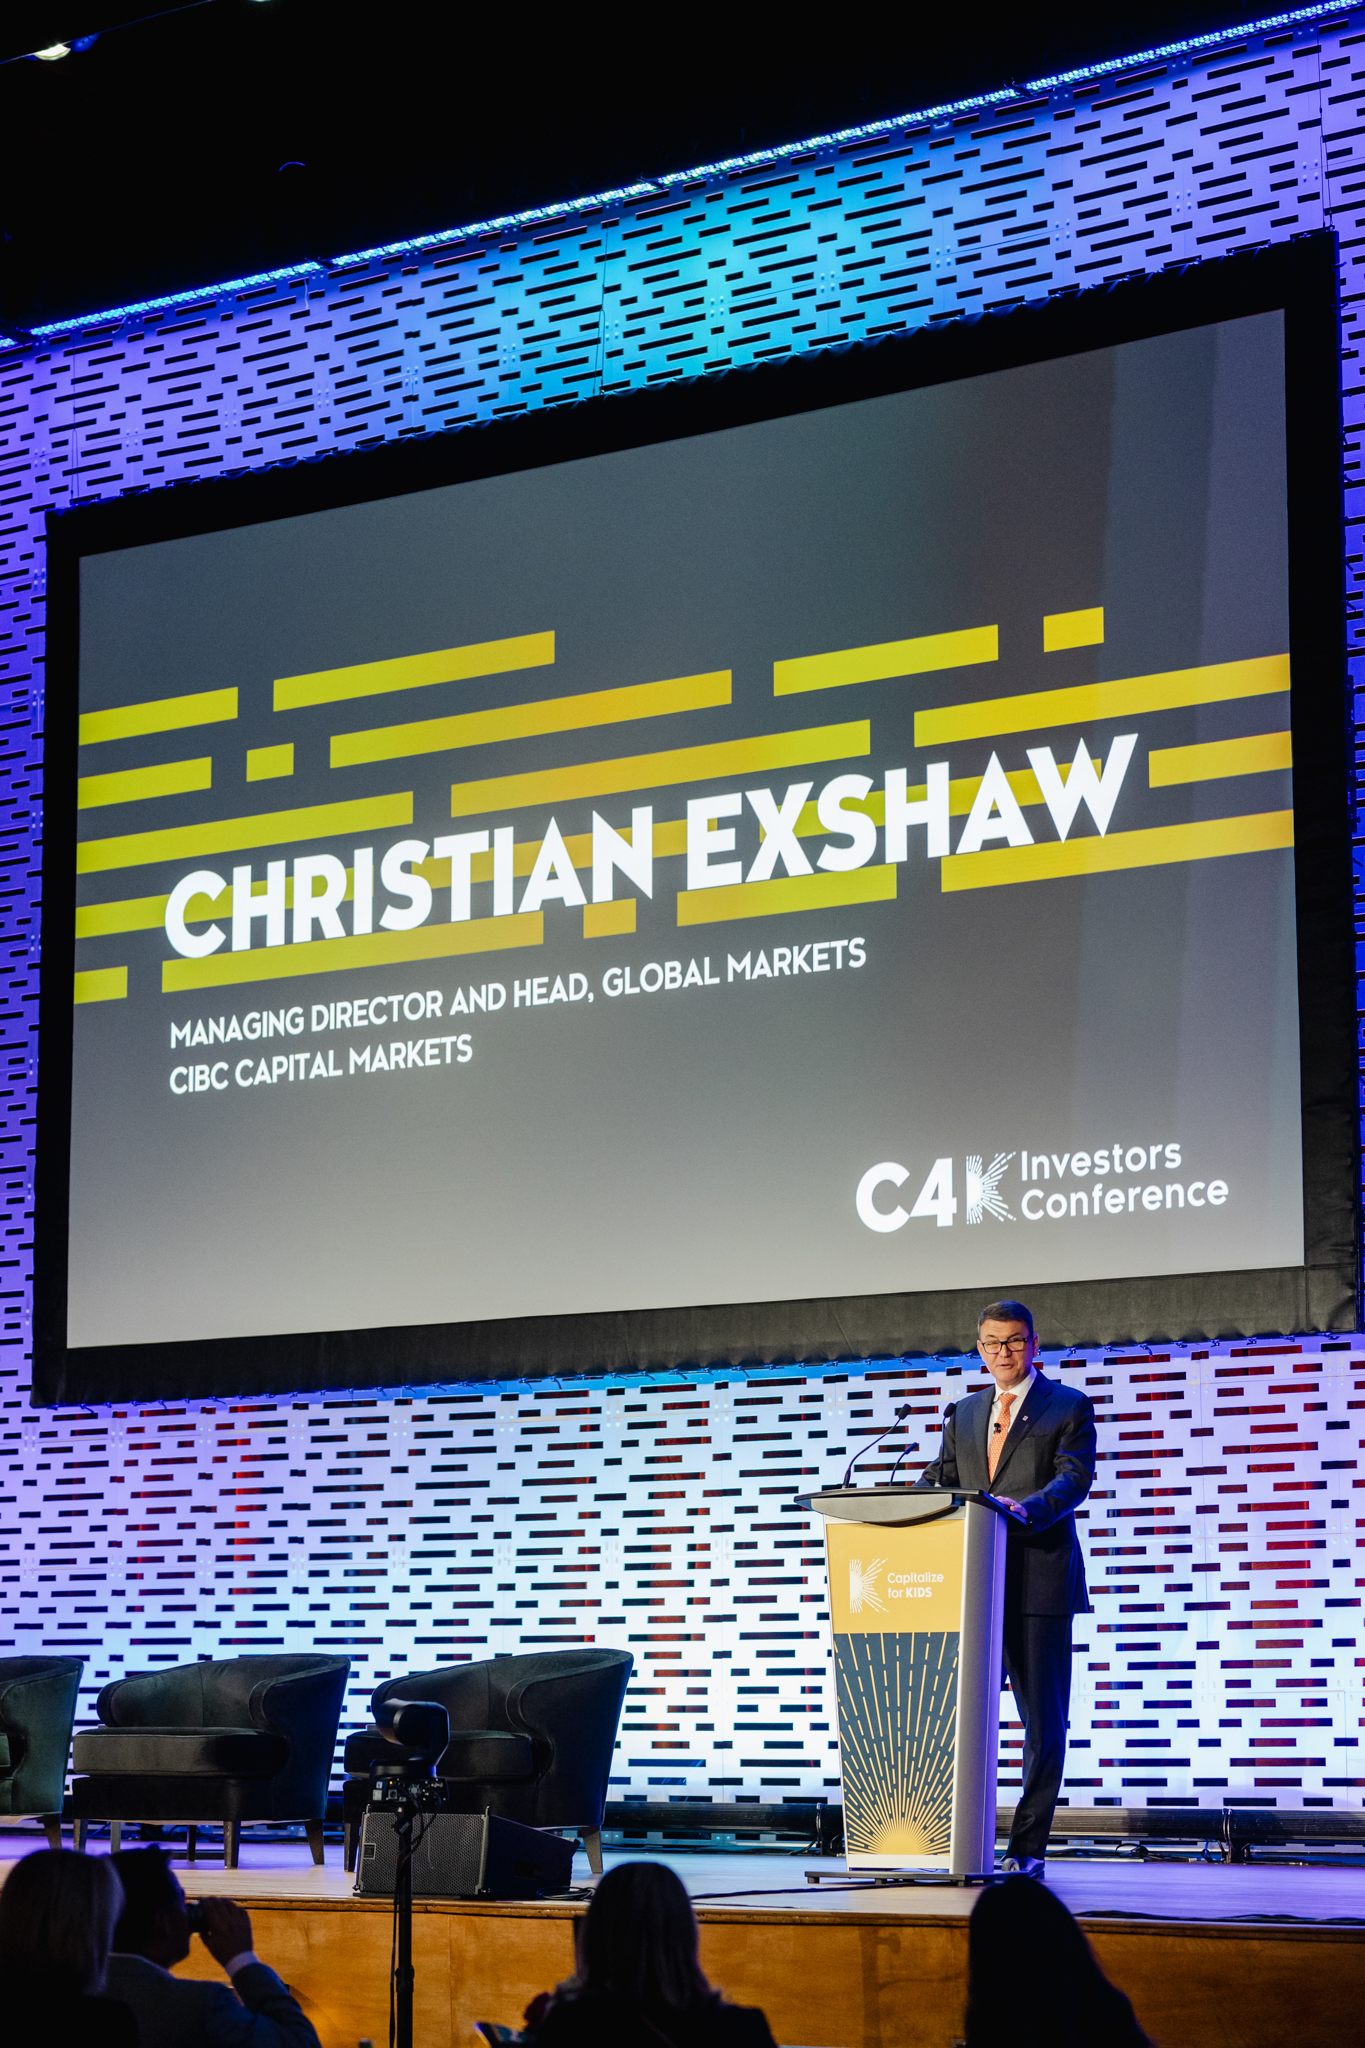 Christian Exshaw speaking on stage at the global markets conference.